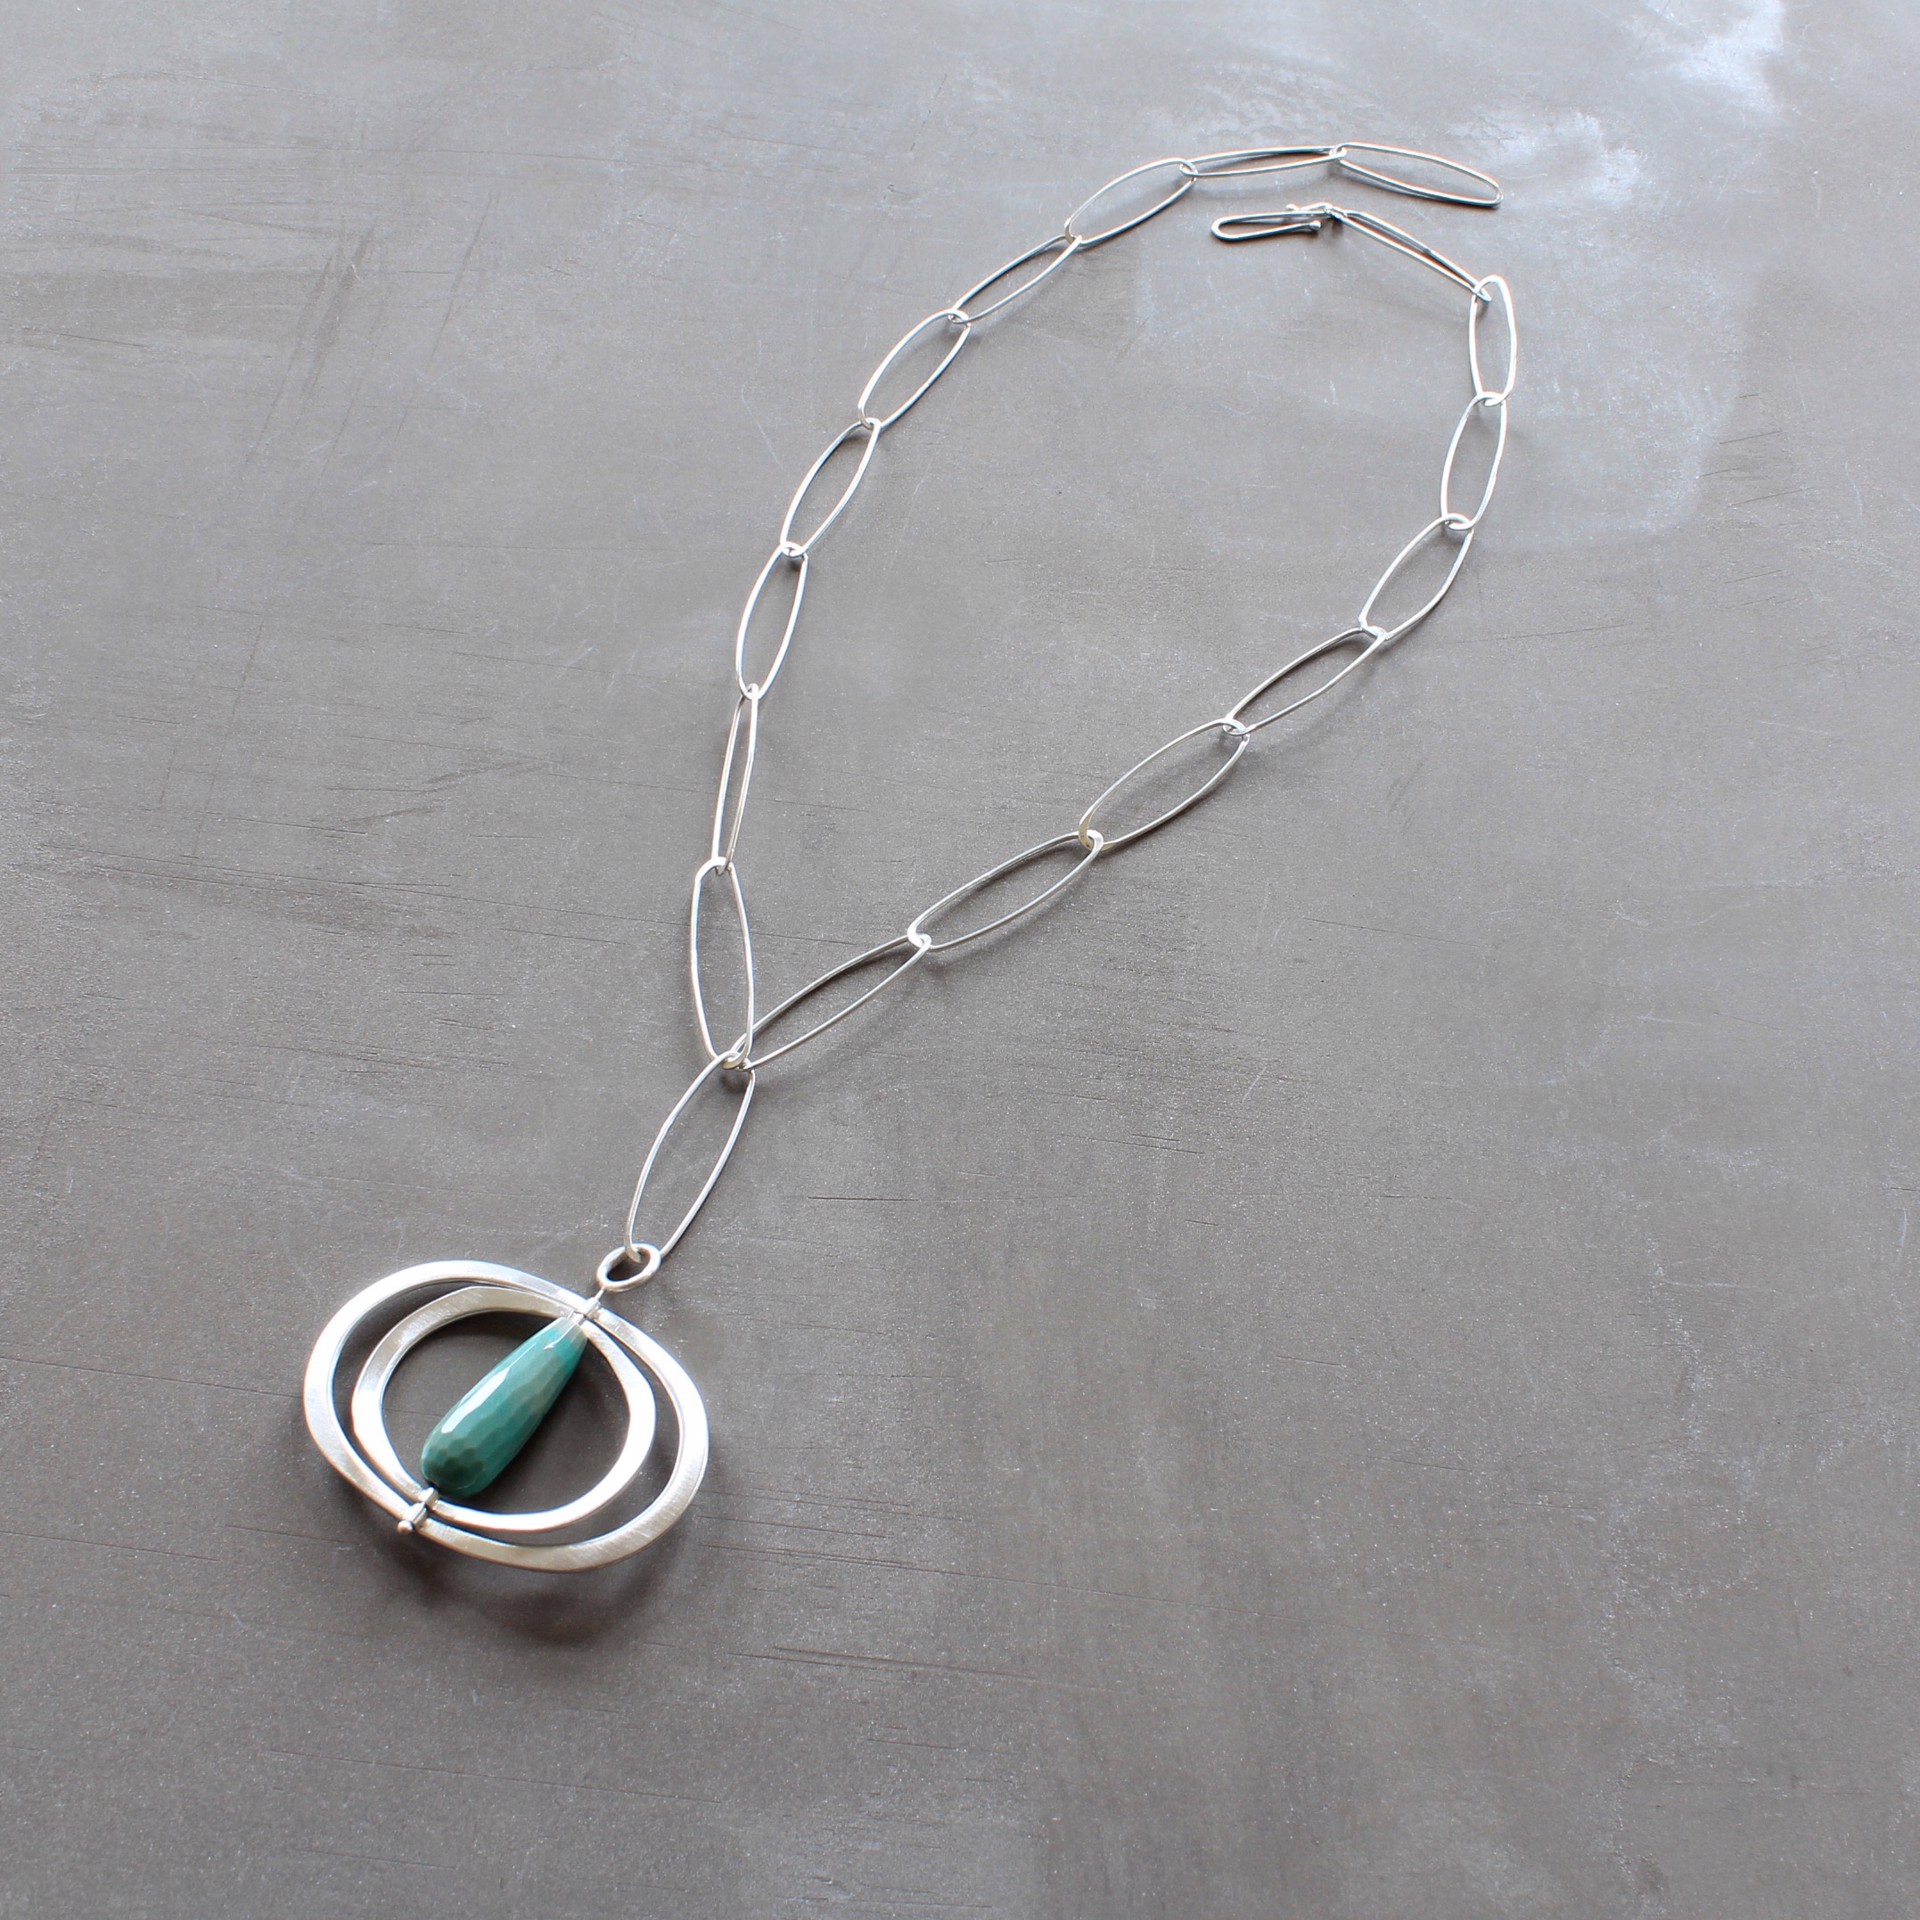 Turquoise + Kenetic Necklace by Audrey Laine